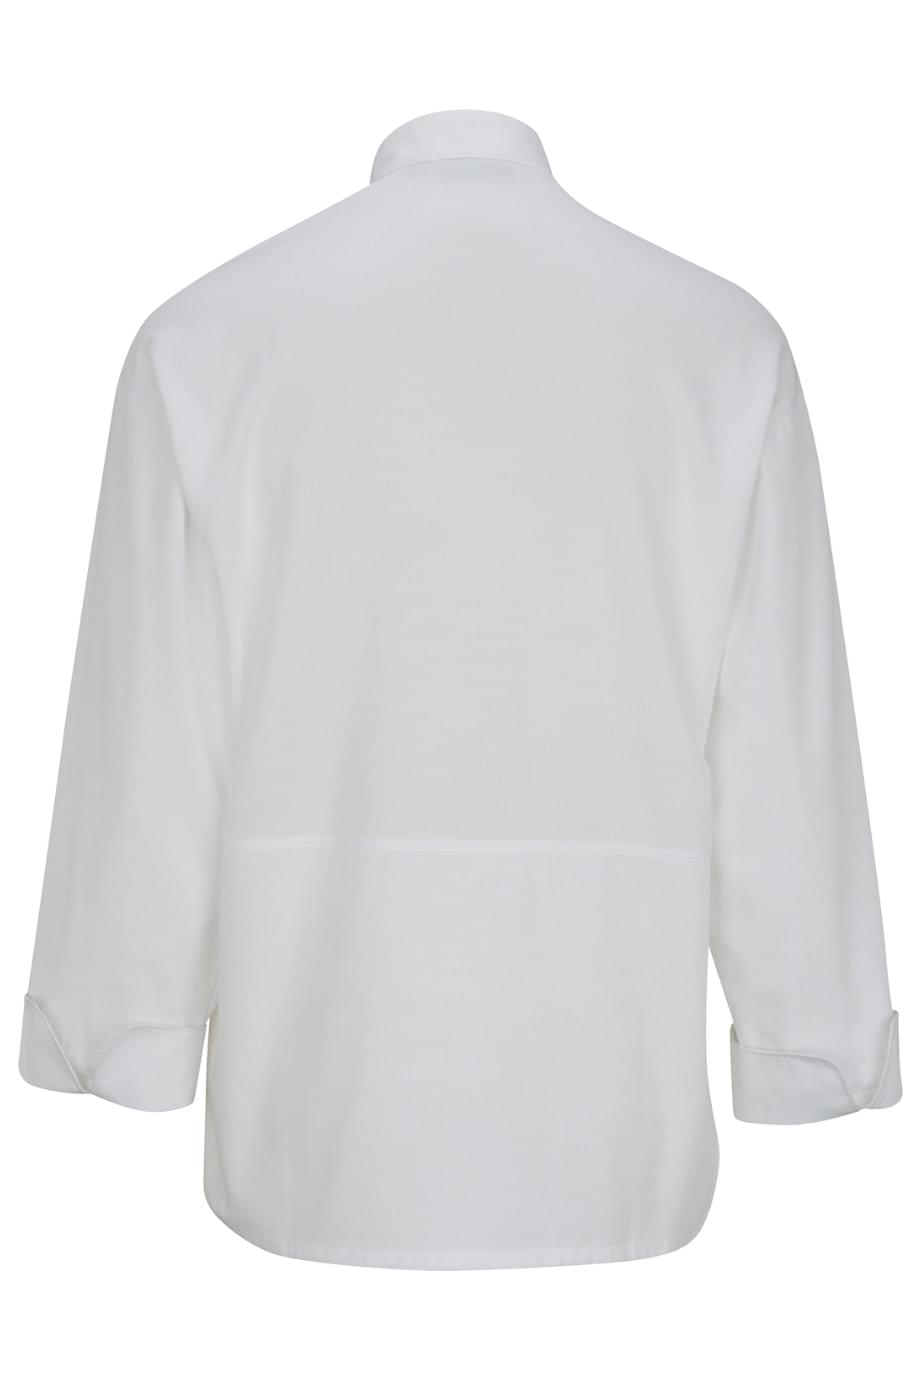 MESH BACK CHEF COAT - 10-BUTTONS